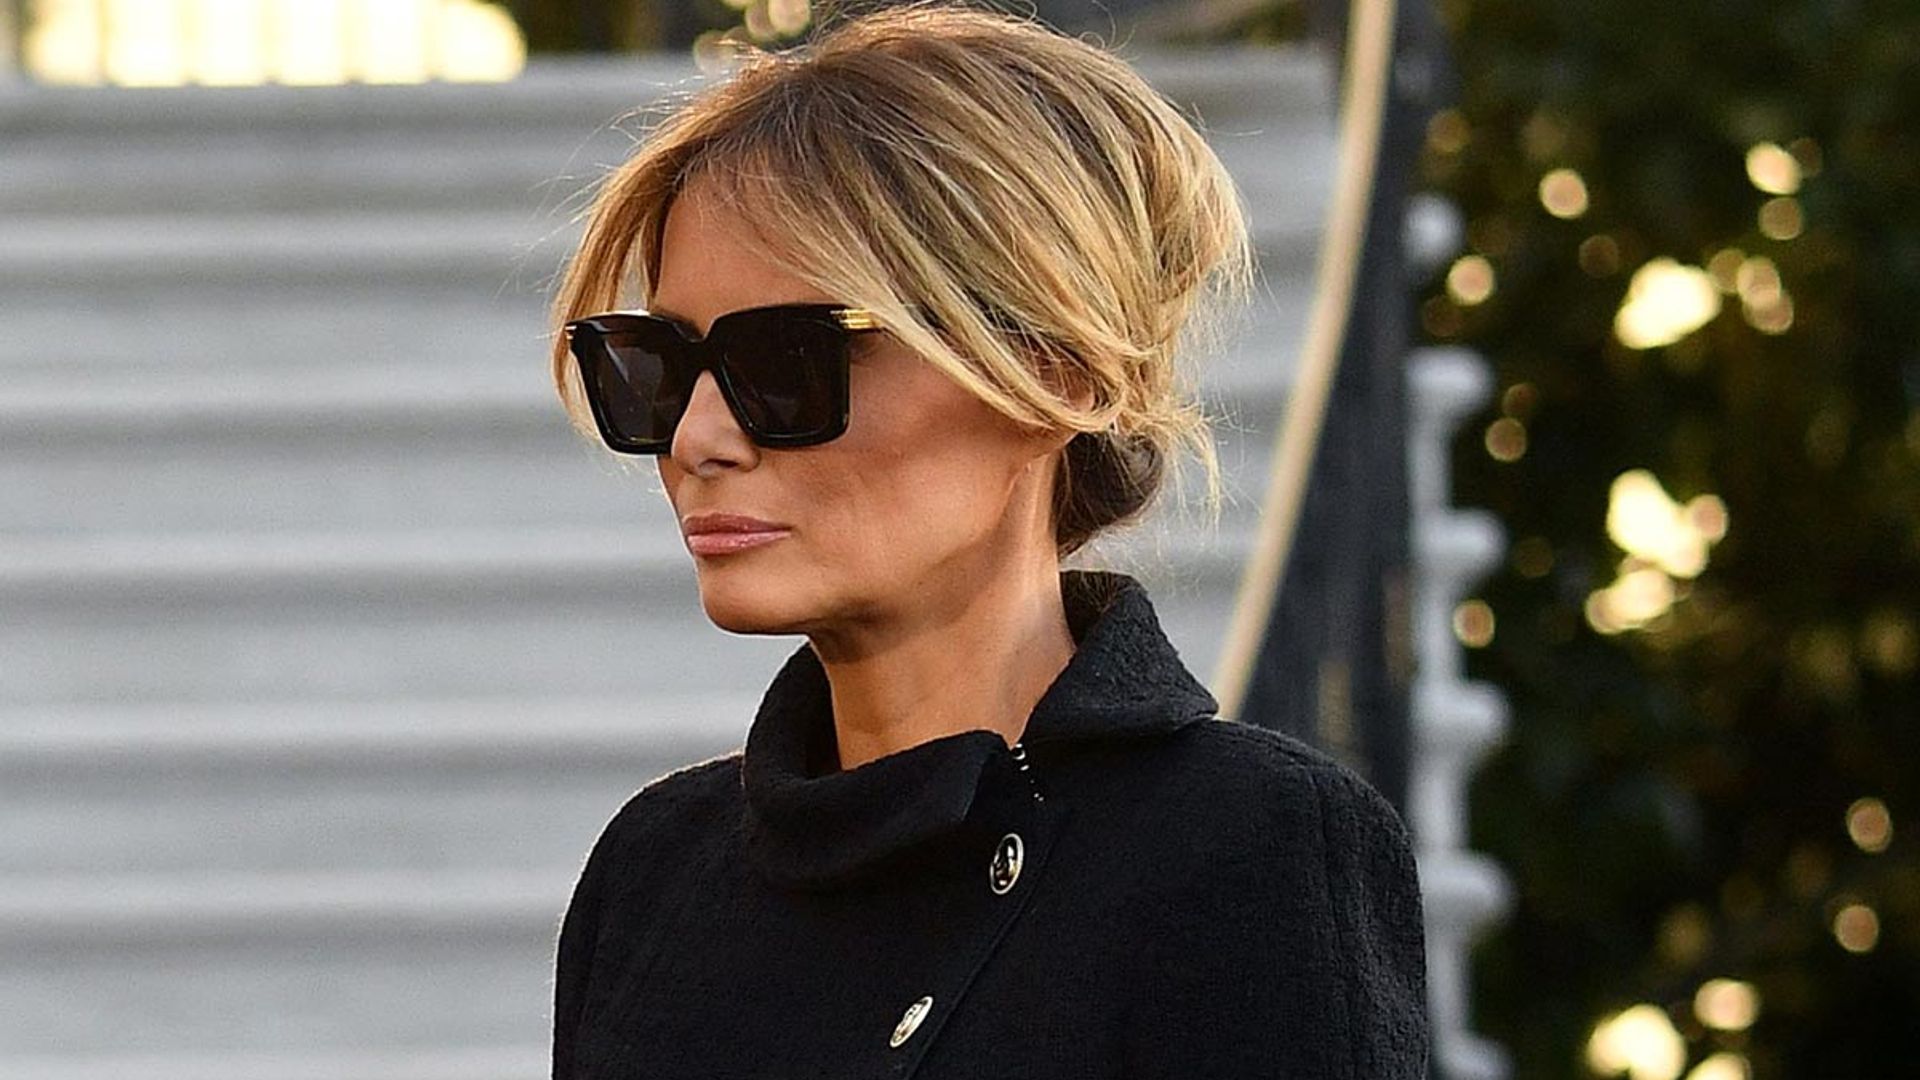 Melania Trump dons symbolic outfit as she exits the White House - and fans react